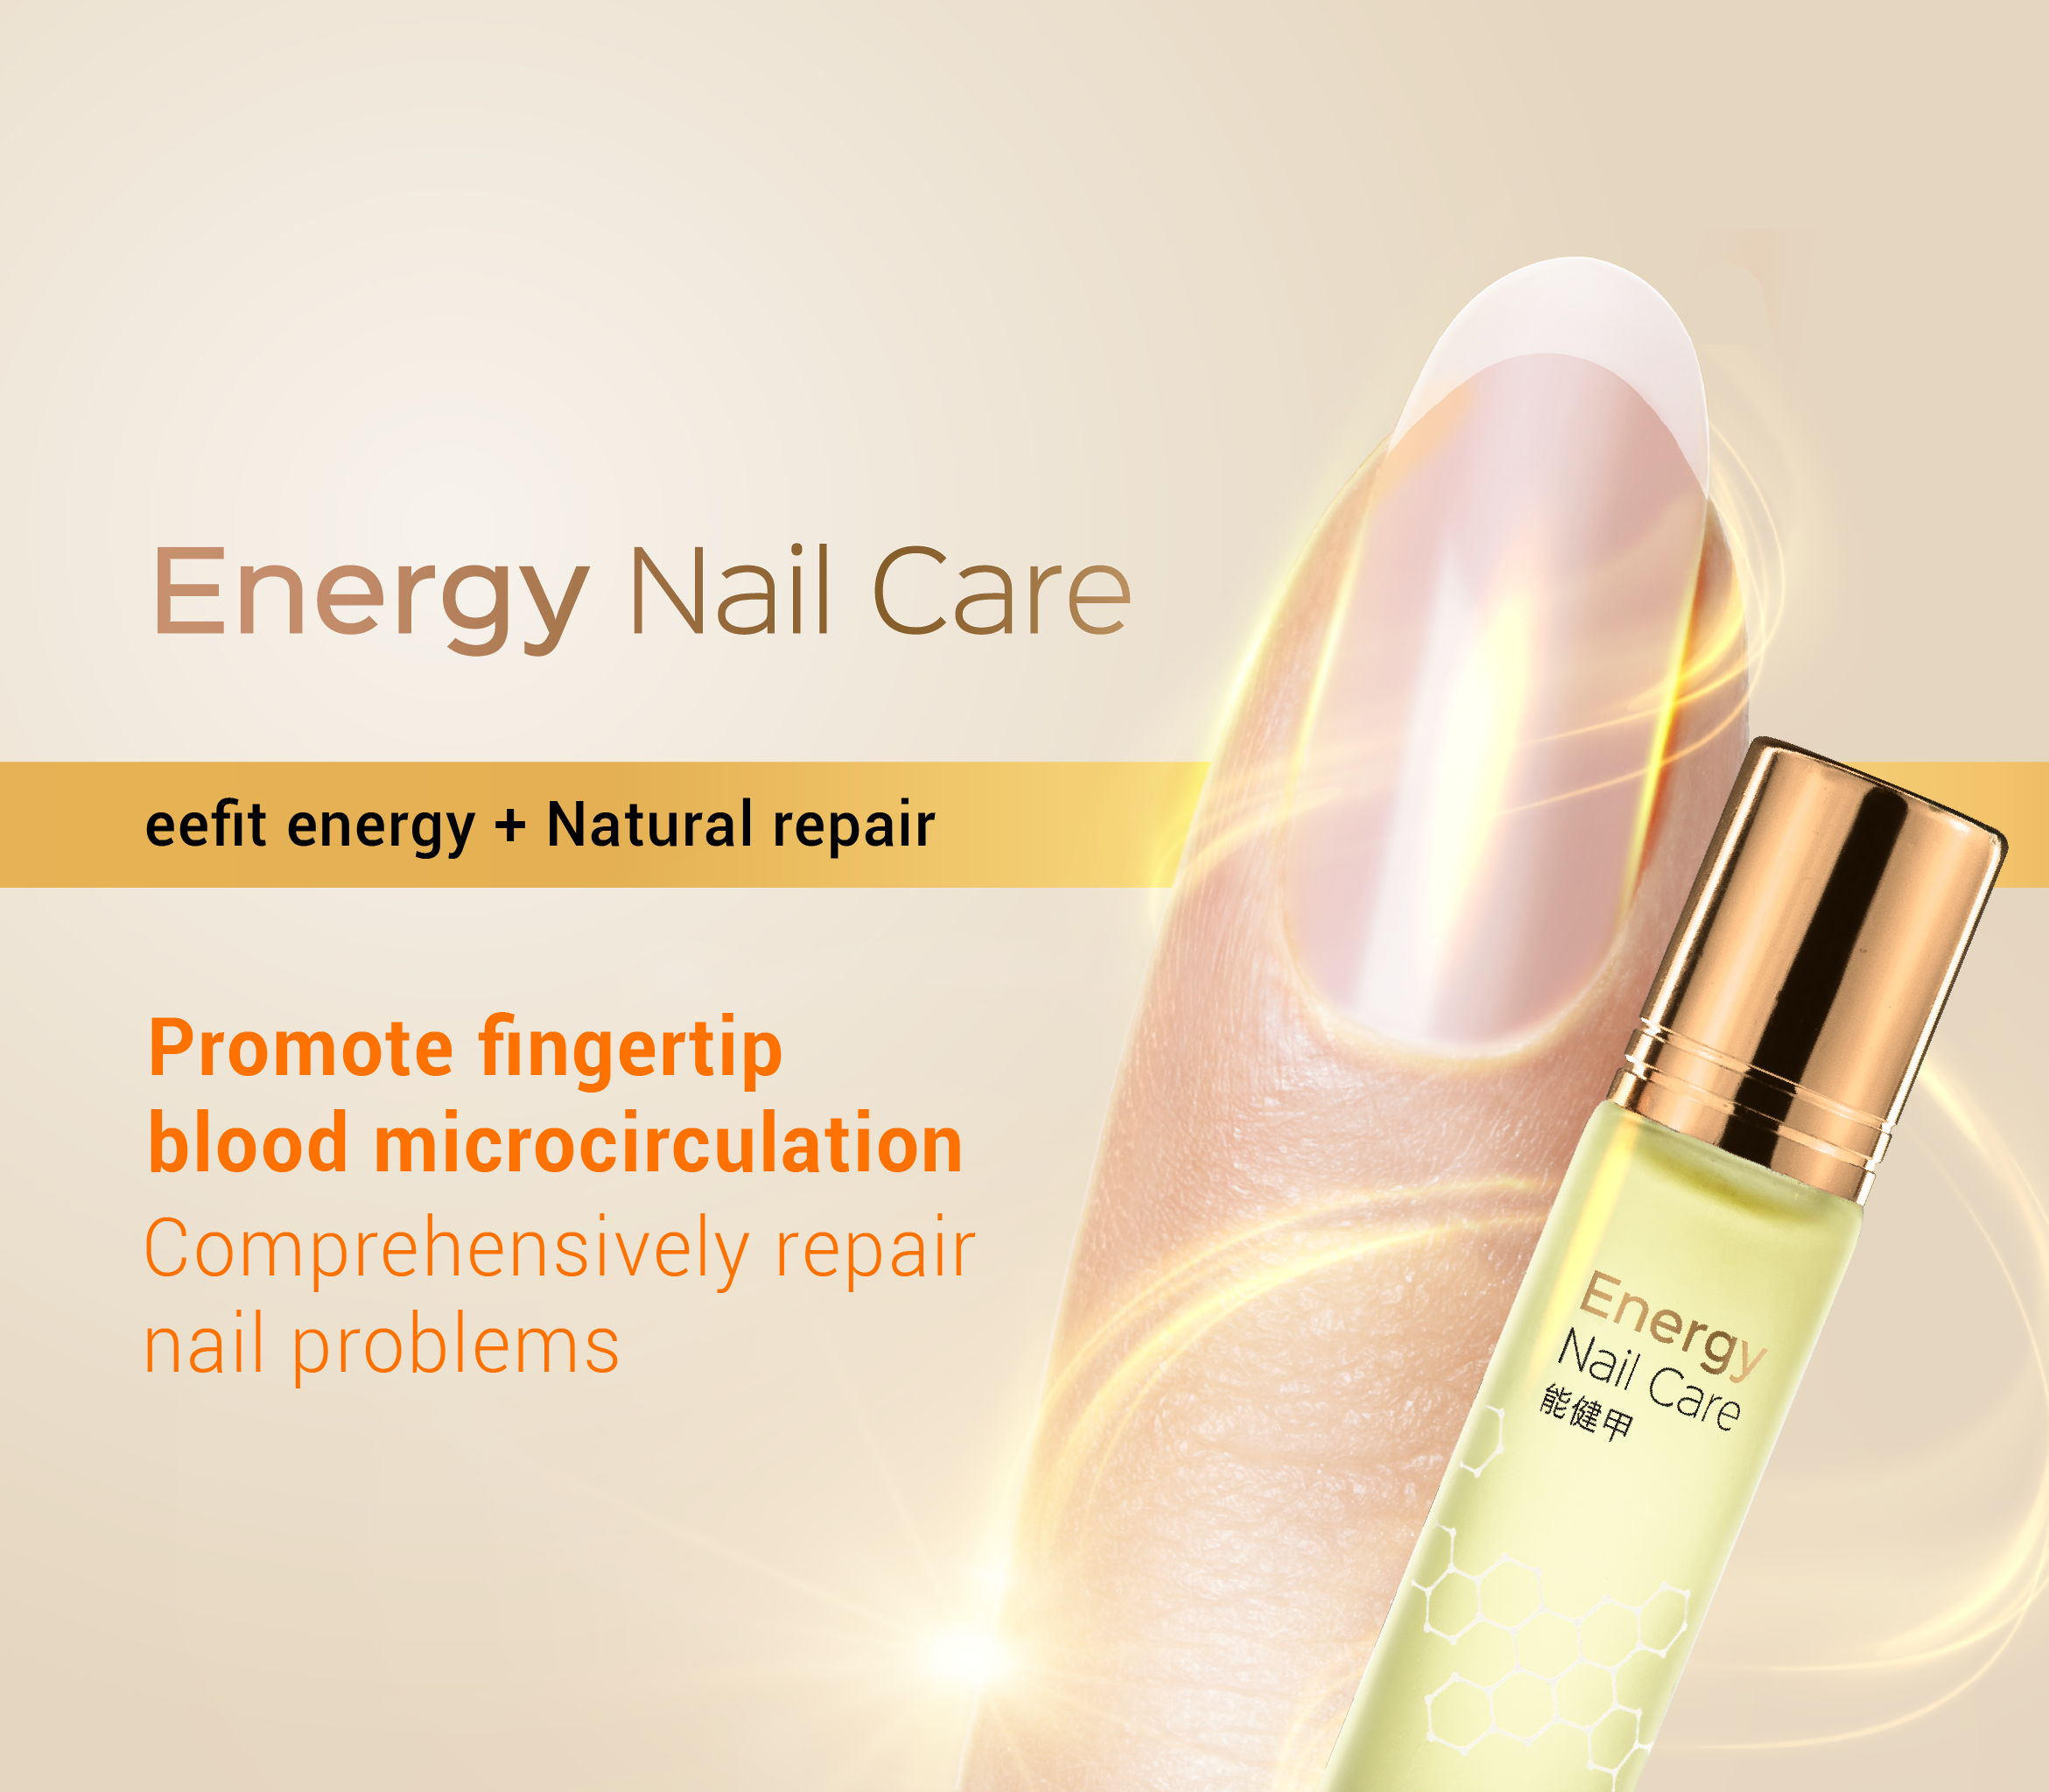 Energy Nail Care Homepage